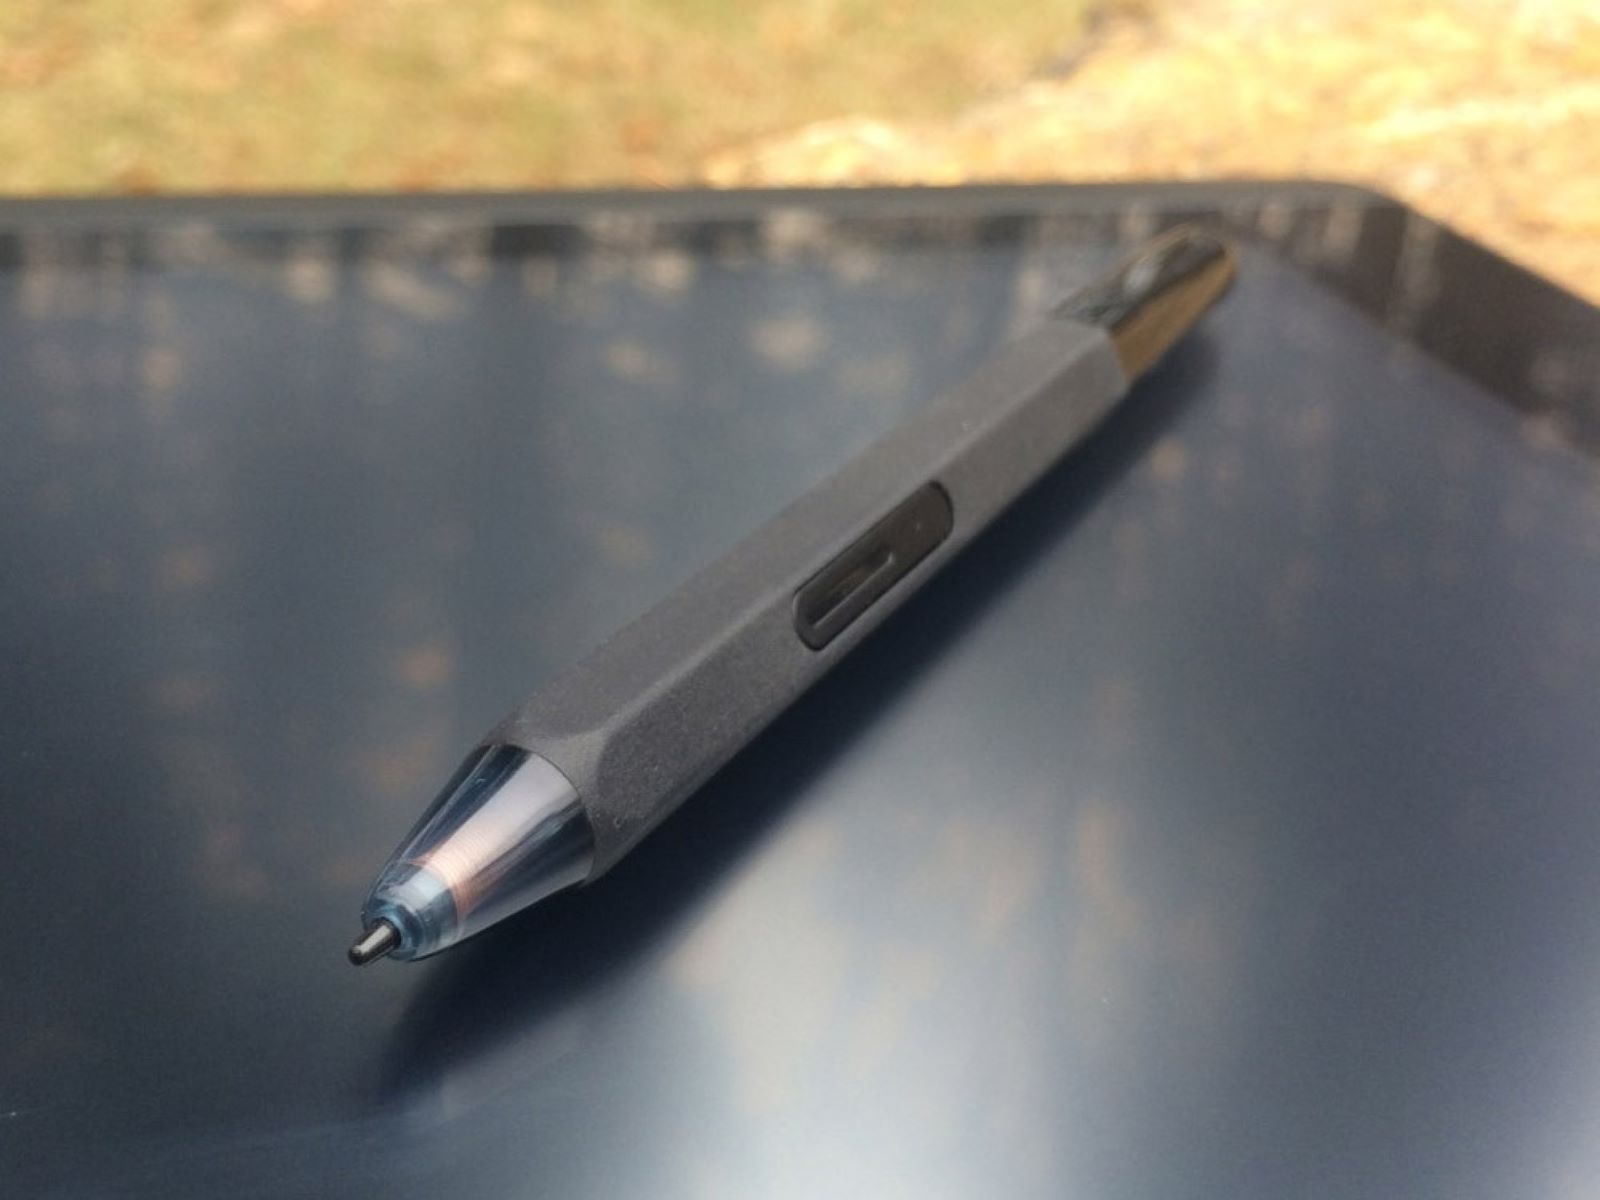 Troubleshooting Issues With Xp-Pen Stylus: Fixes